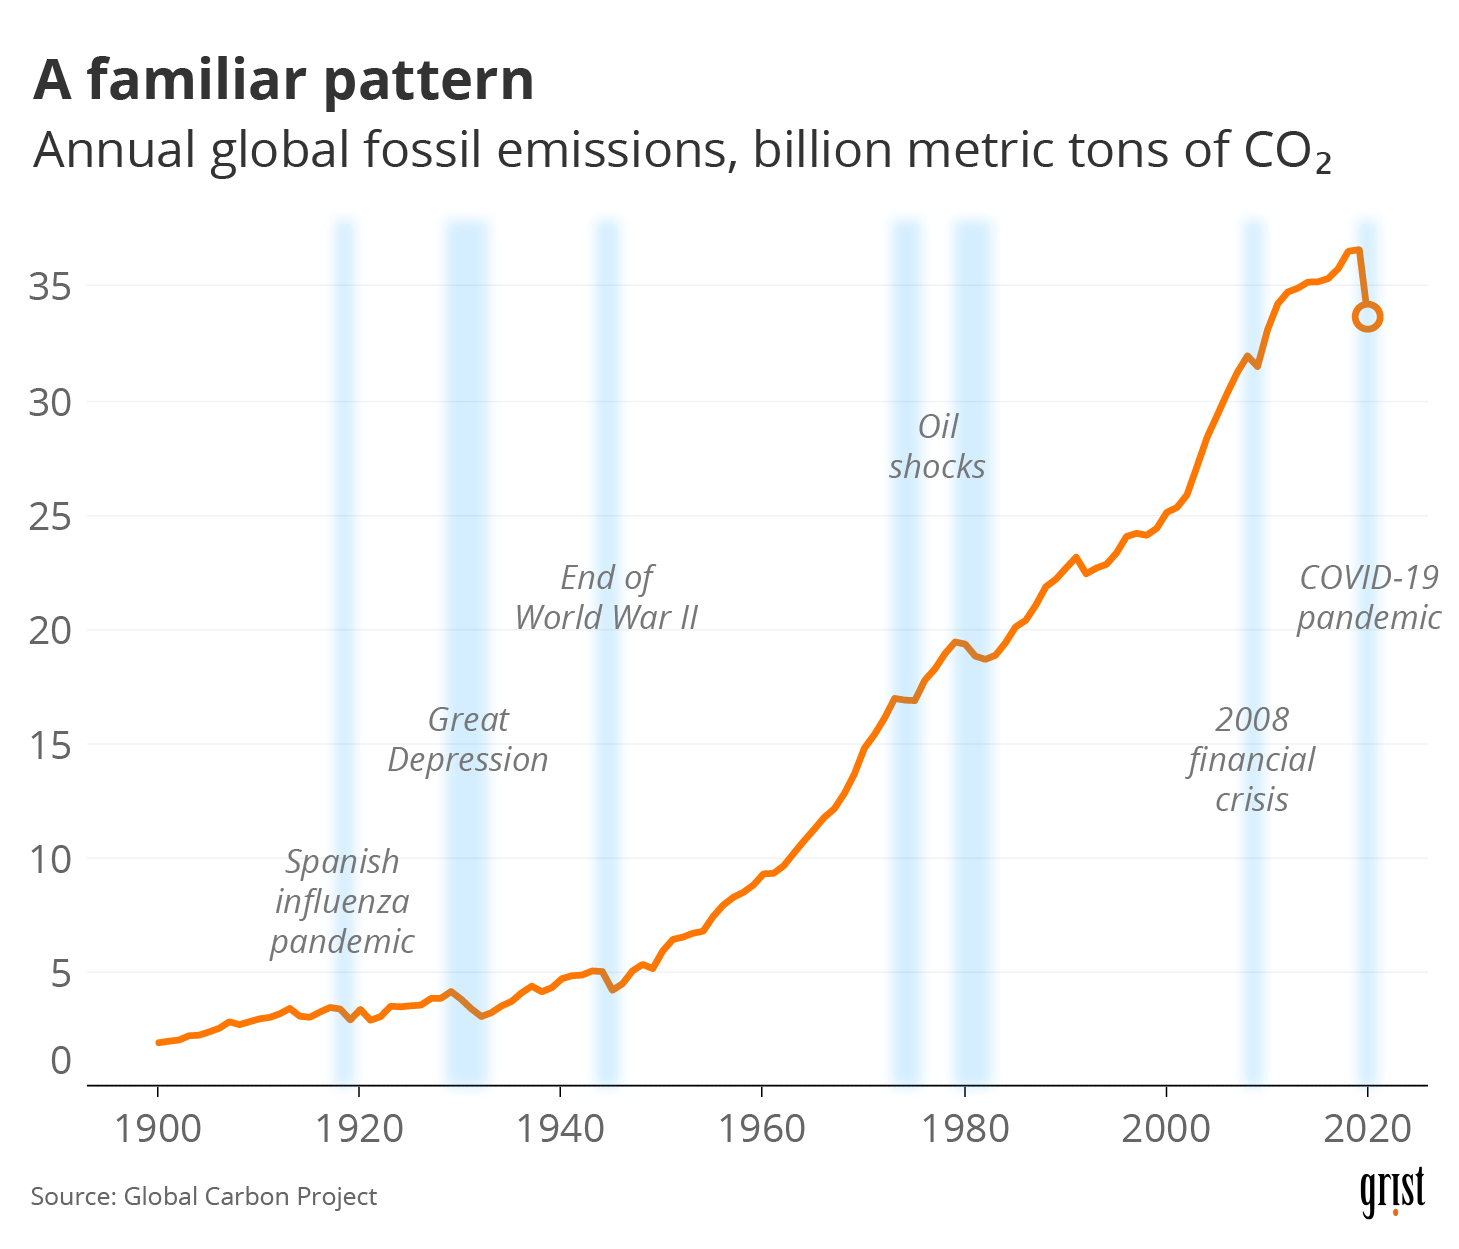 A line chart showing annual global fossil emissions from 1900 through 2020 in billion metric tons of CO2. Various global shocks (including the Great Depression and the 2008 financial crisis) lead to dips in emissions. The COVID-19 pandemic elicits the largest decrease.